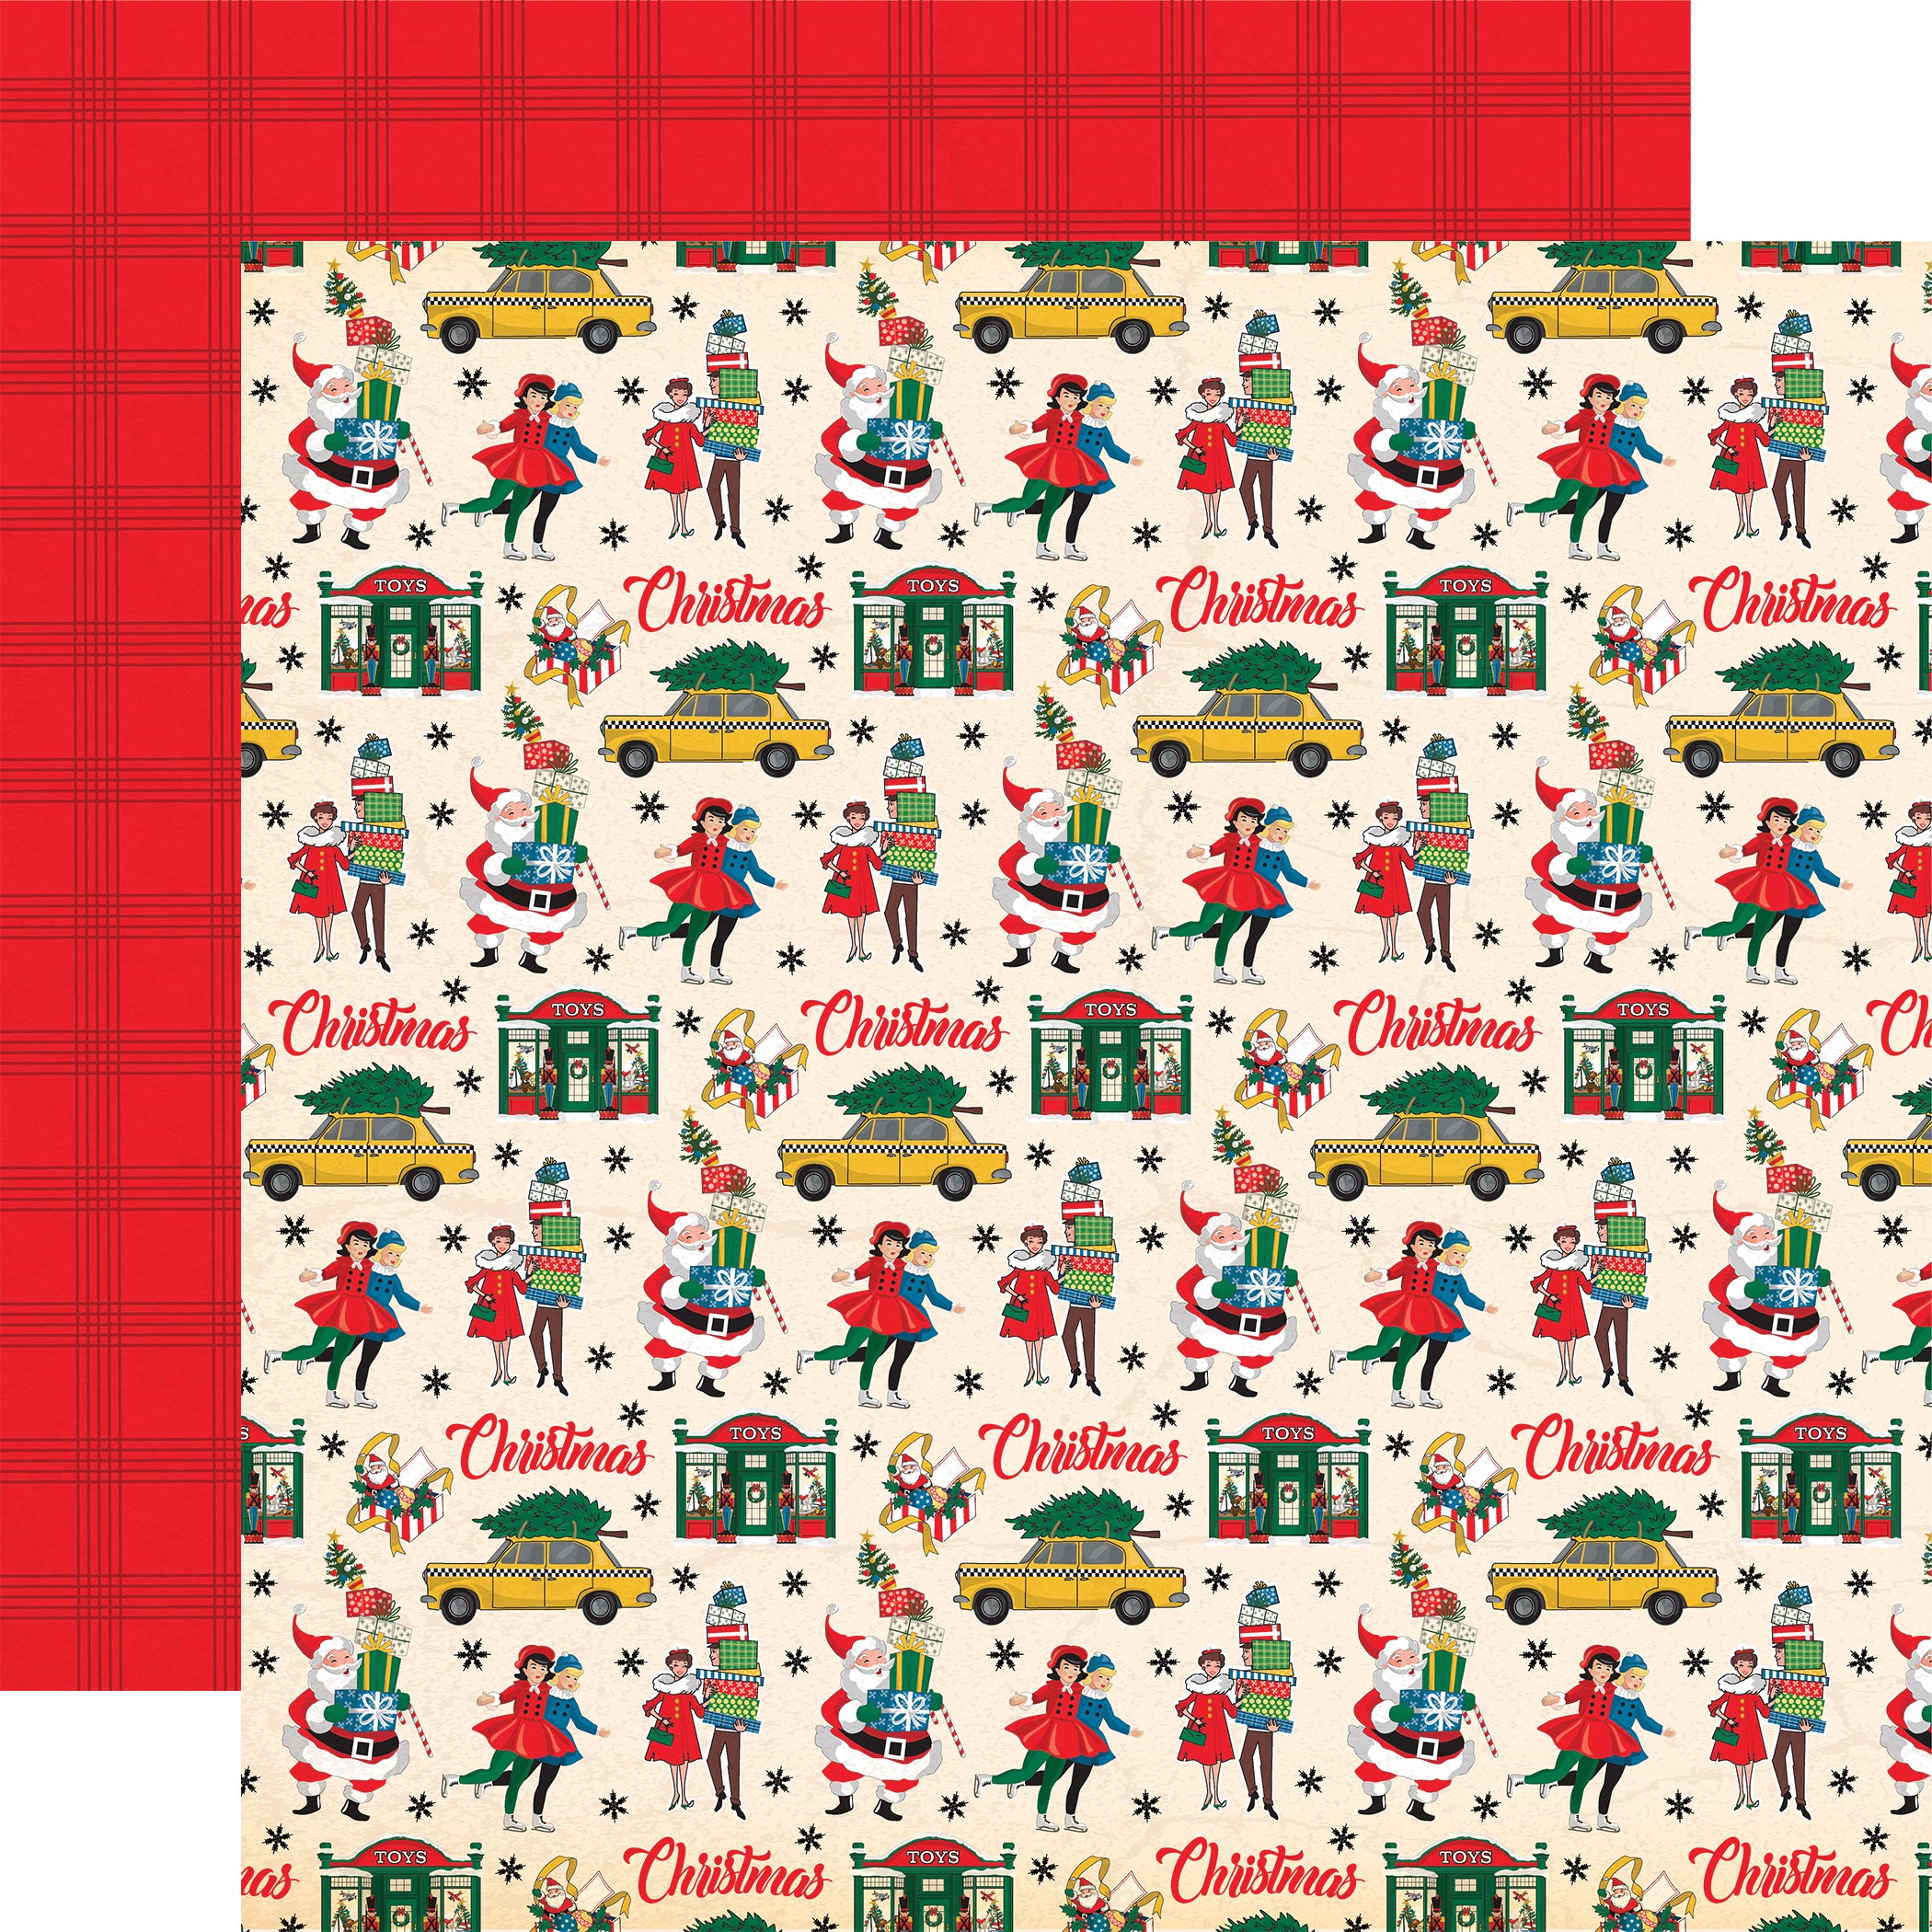 Season's Greetings Collection Christmas In The City 12 x 12 Double-Sided Scrapbook Paper by Carta Bella